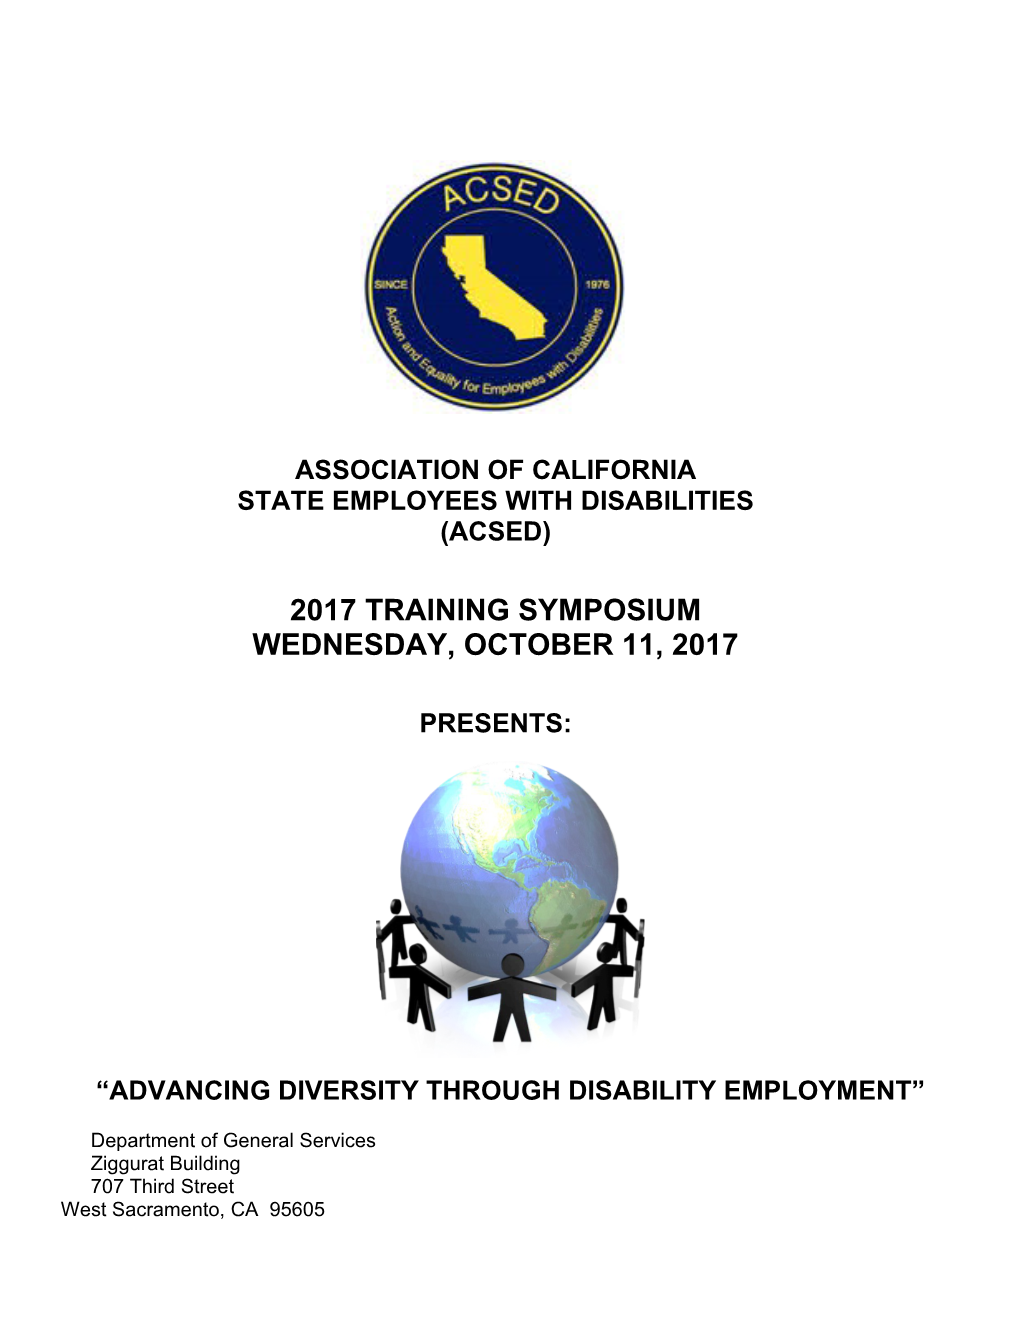 State Employees with Disabilities